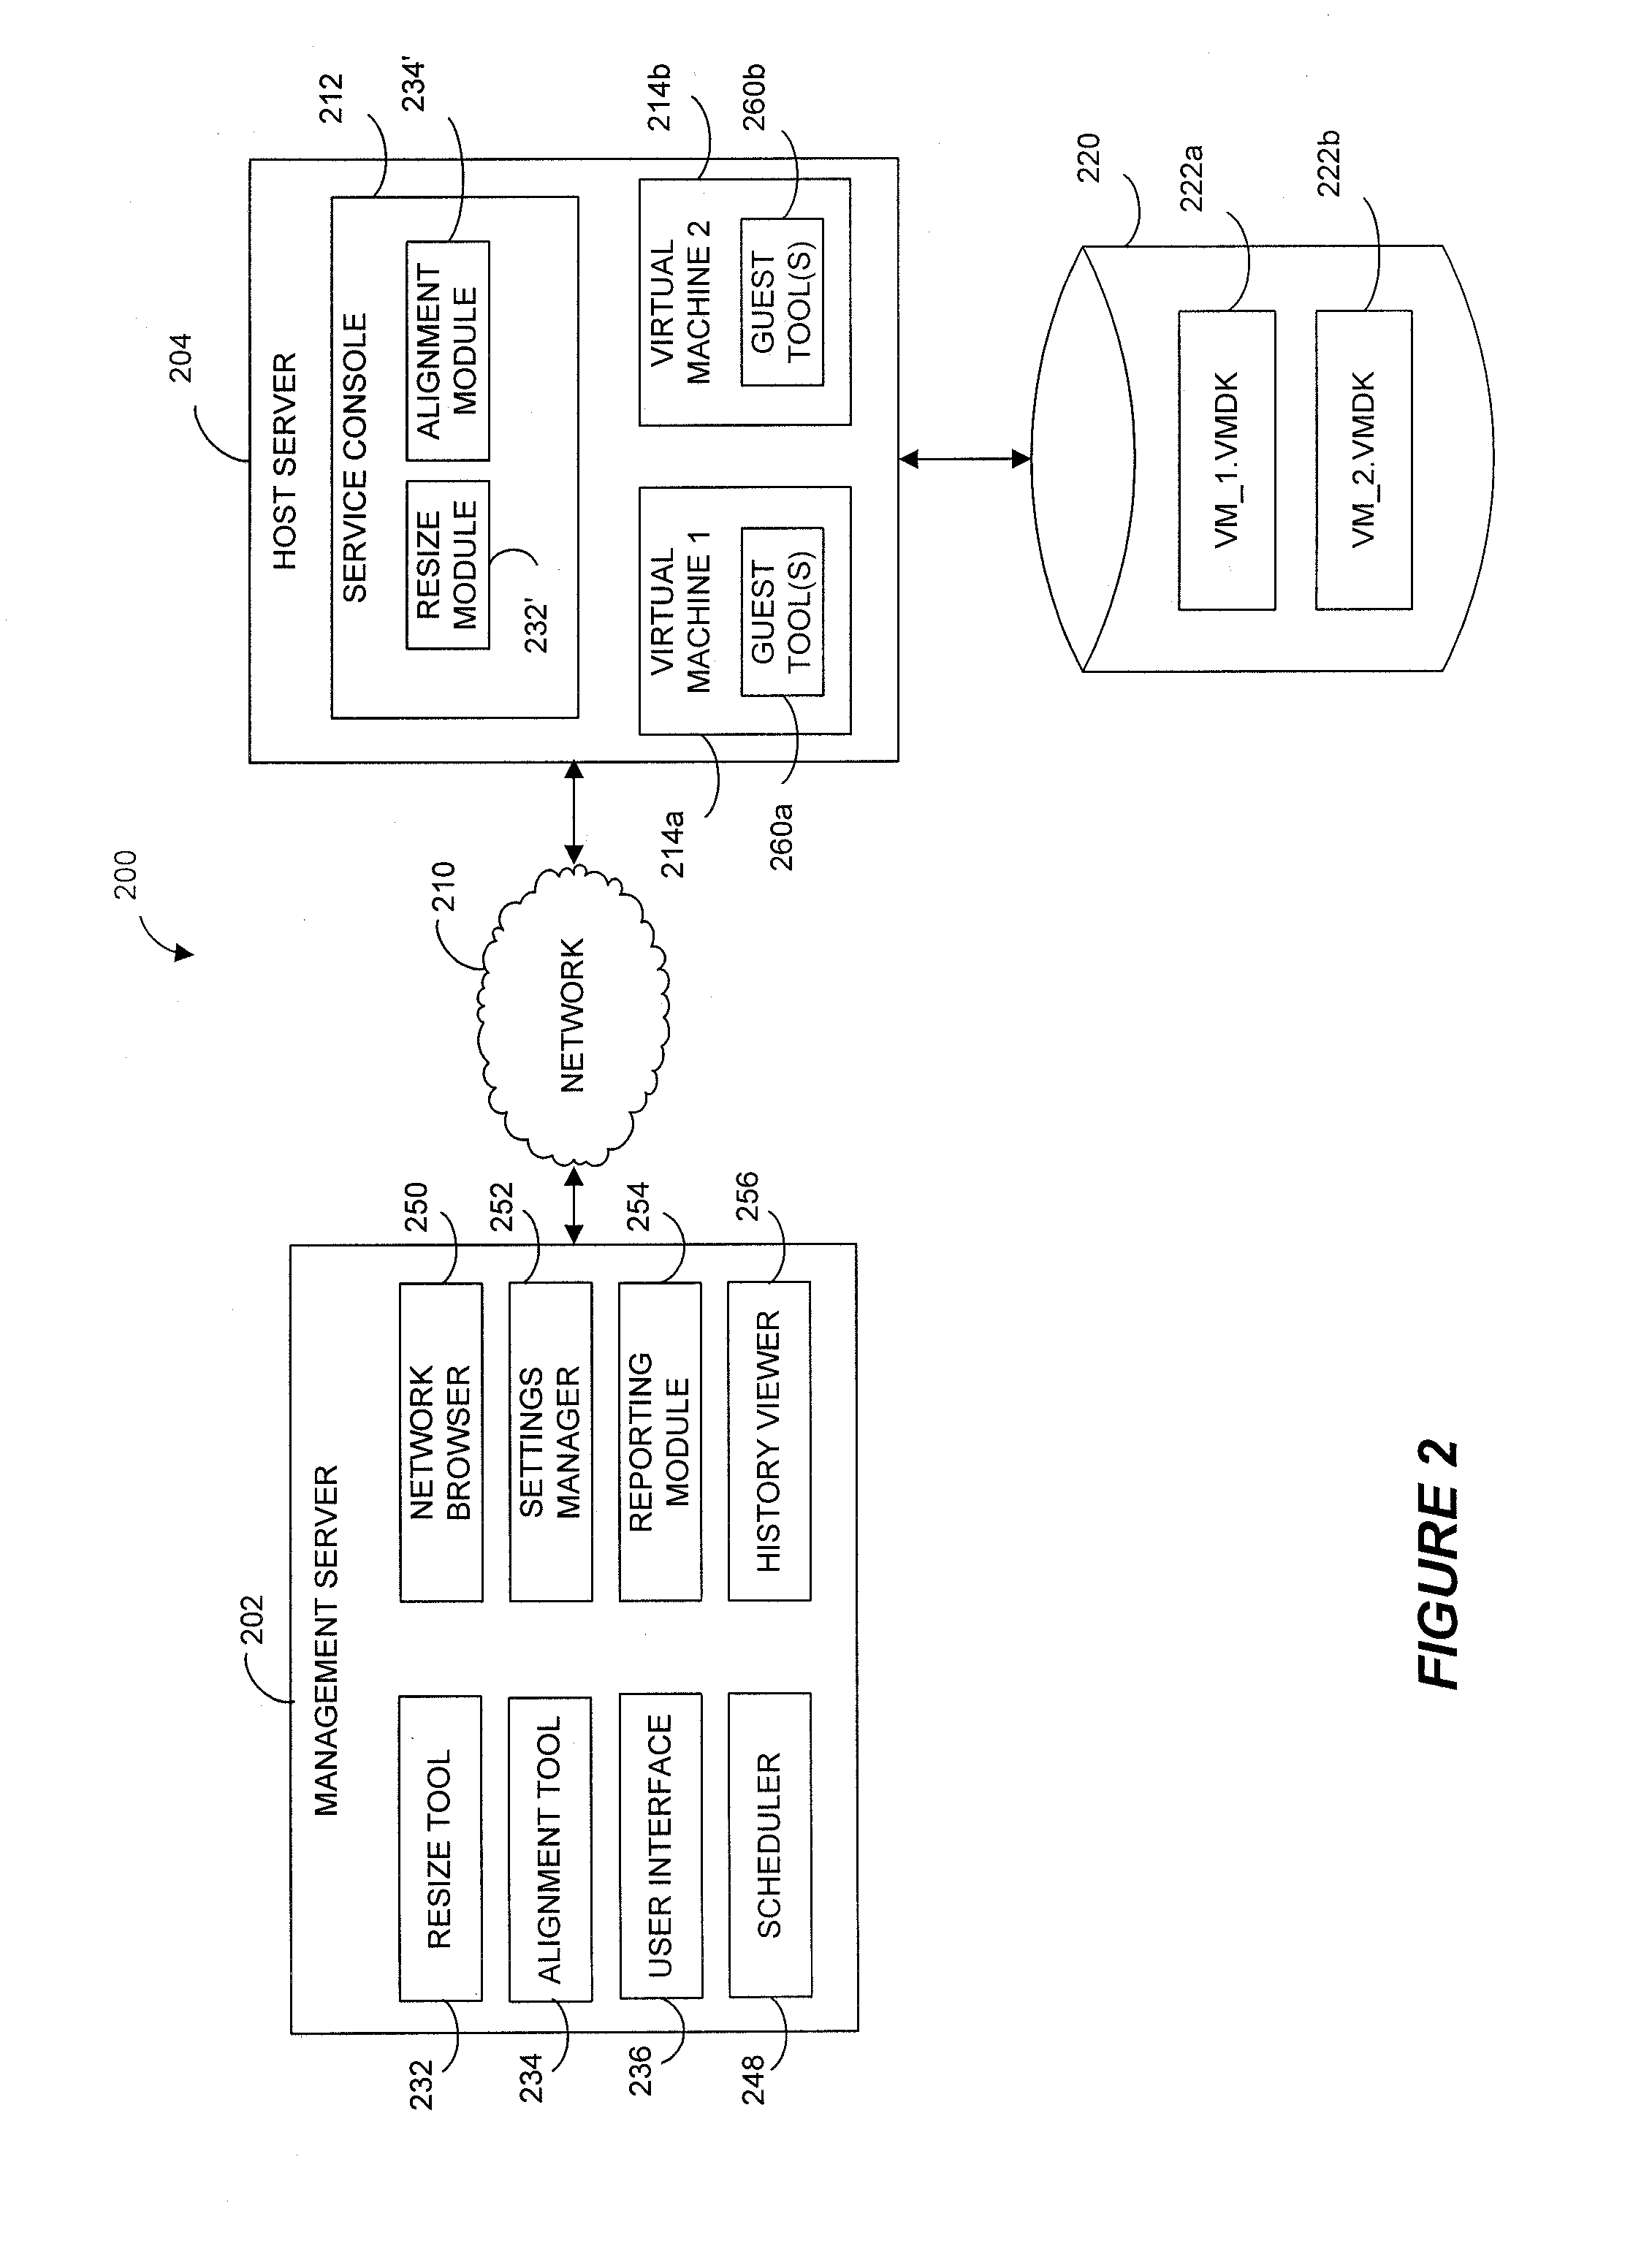 Systems and methods for improving virtual machine performance